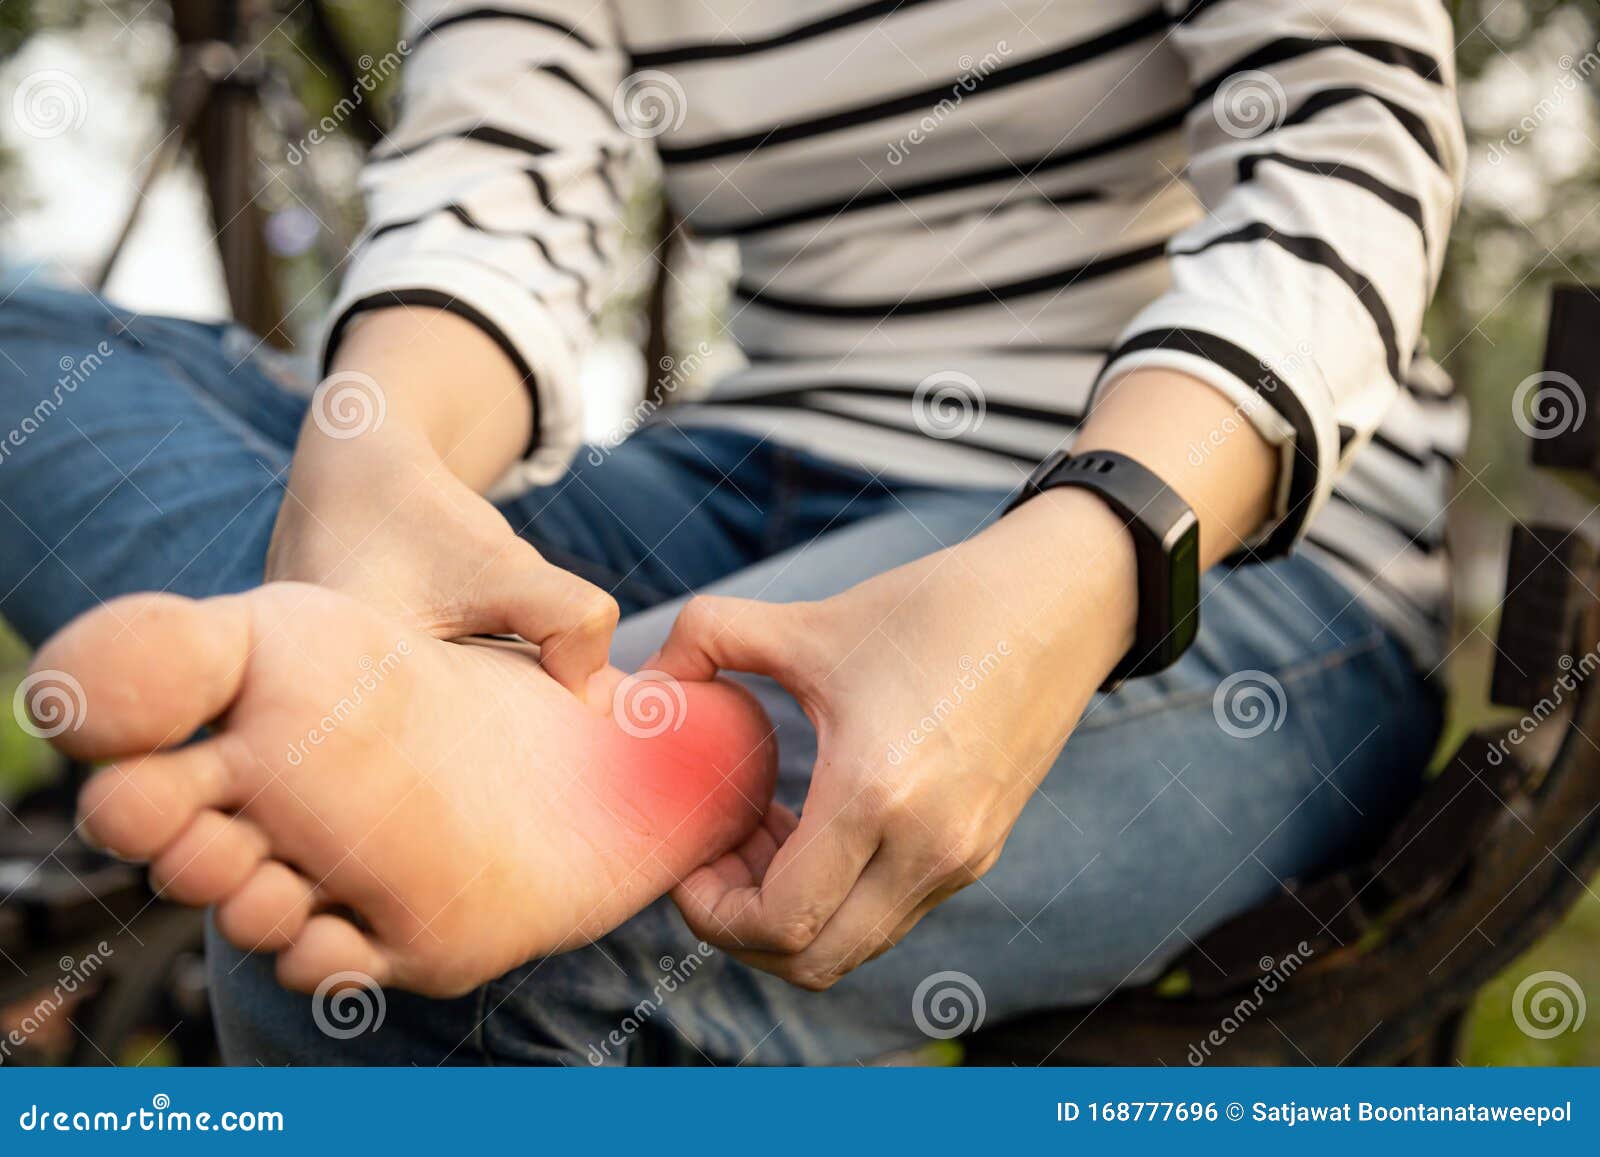 plantar fasciitis,asian young woman holding her feet and massage with her hand suffer from tendon inflammation,female people sore